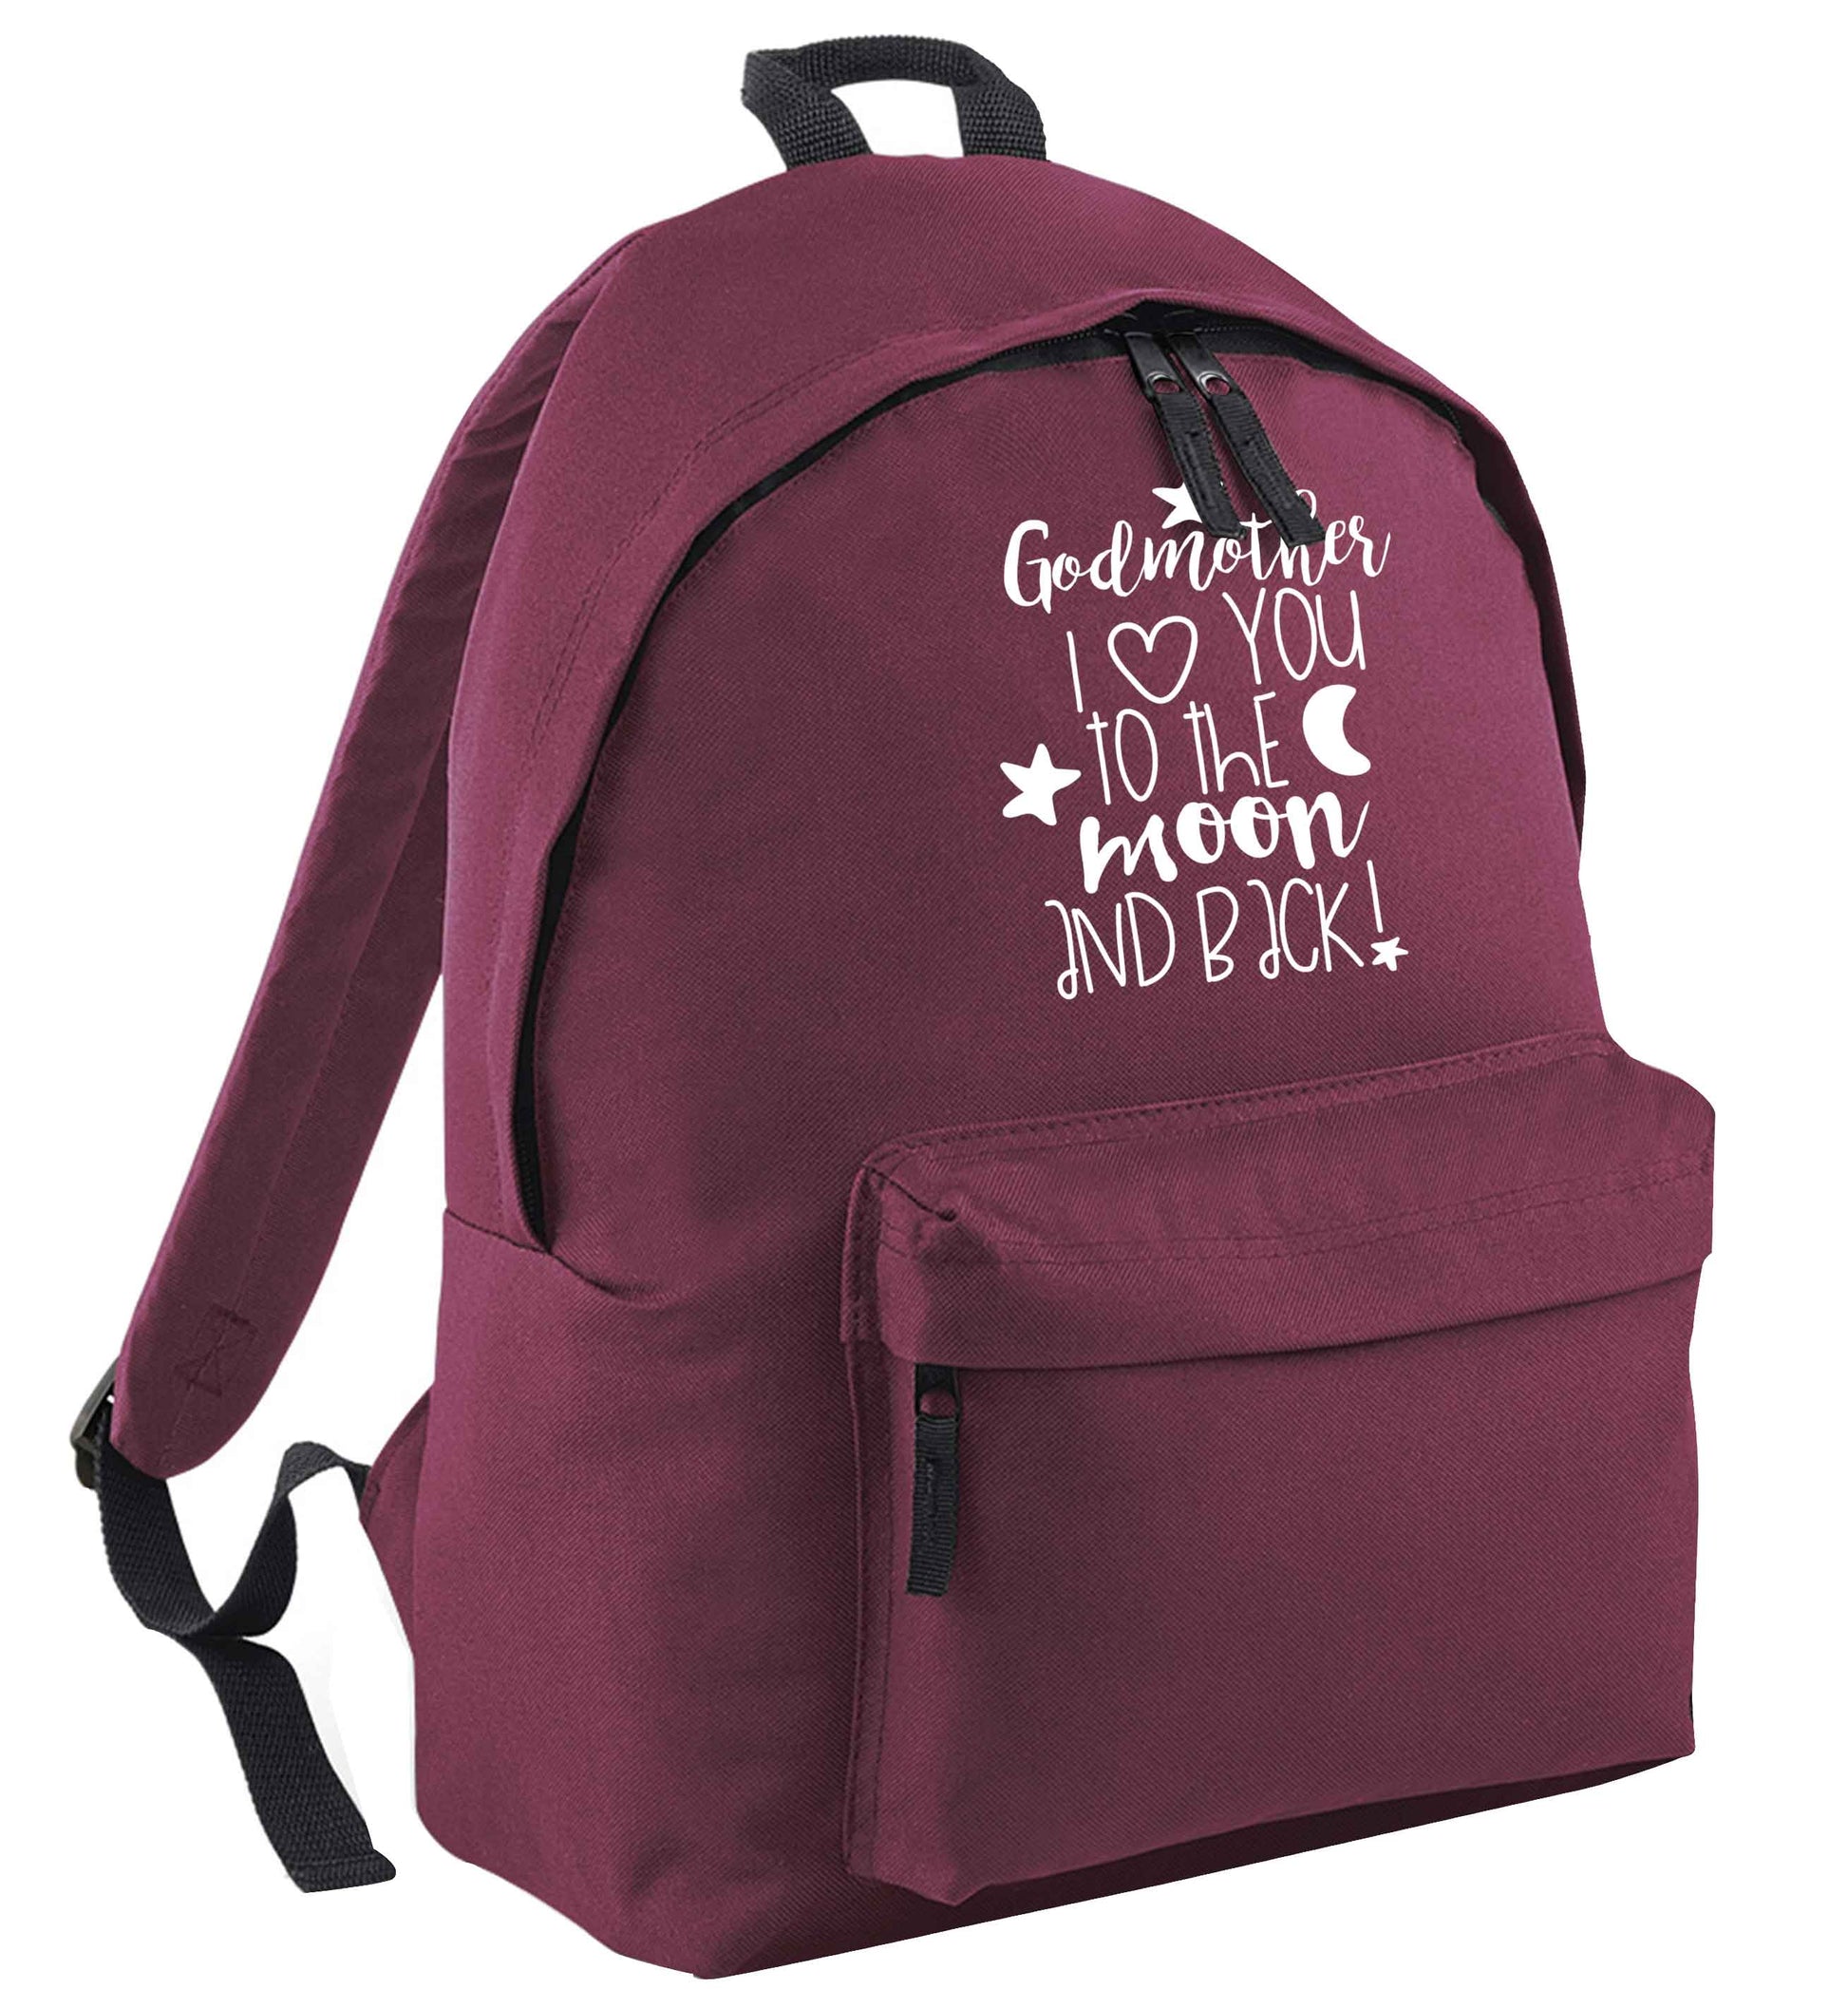 Godmother I love you to the moon and back maroon adults backpack